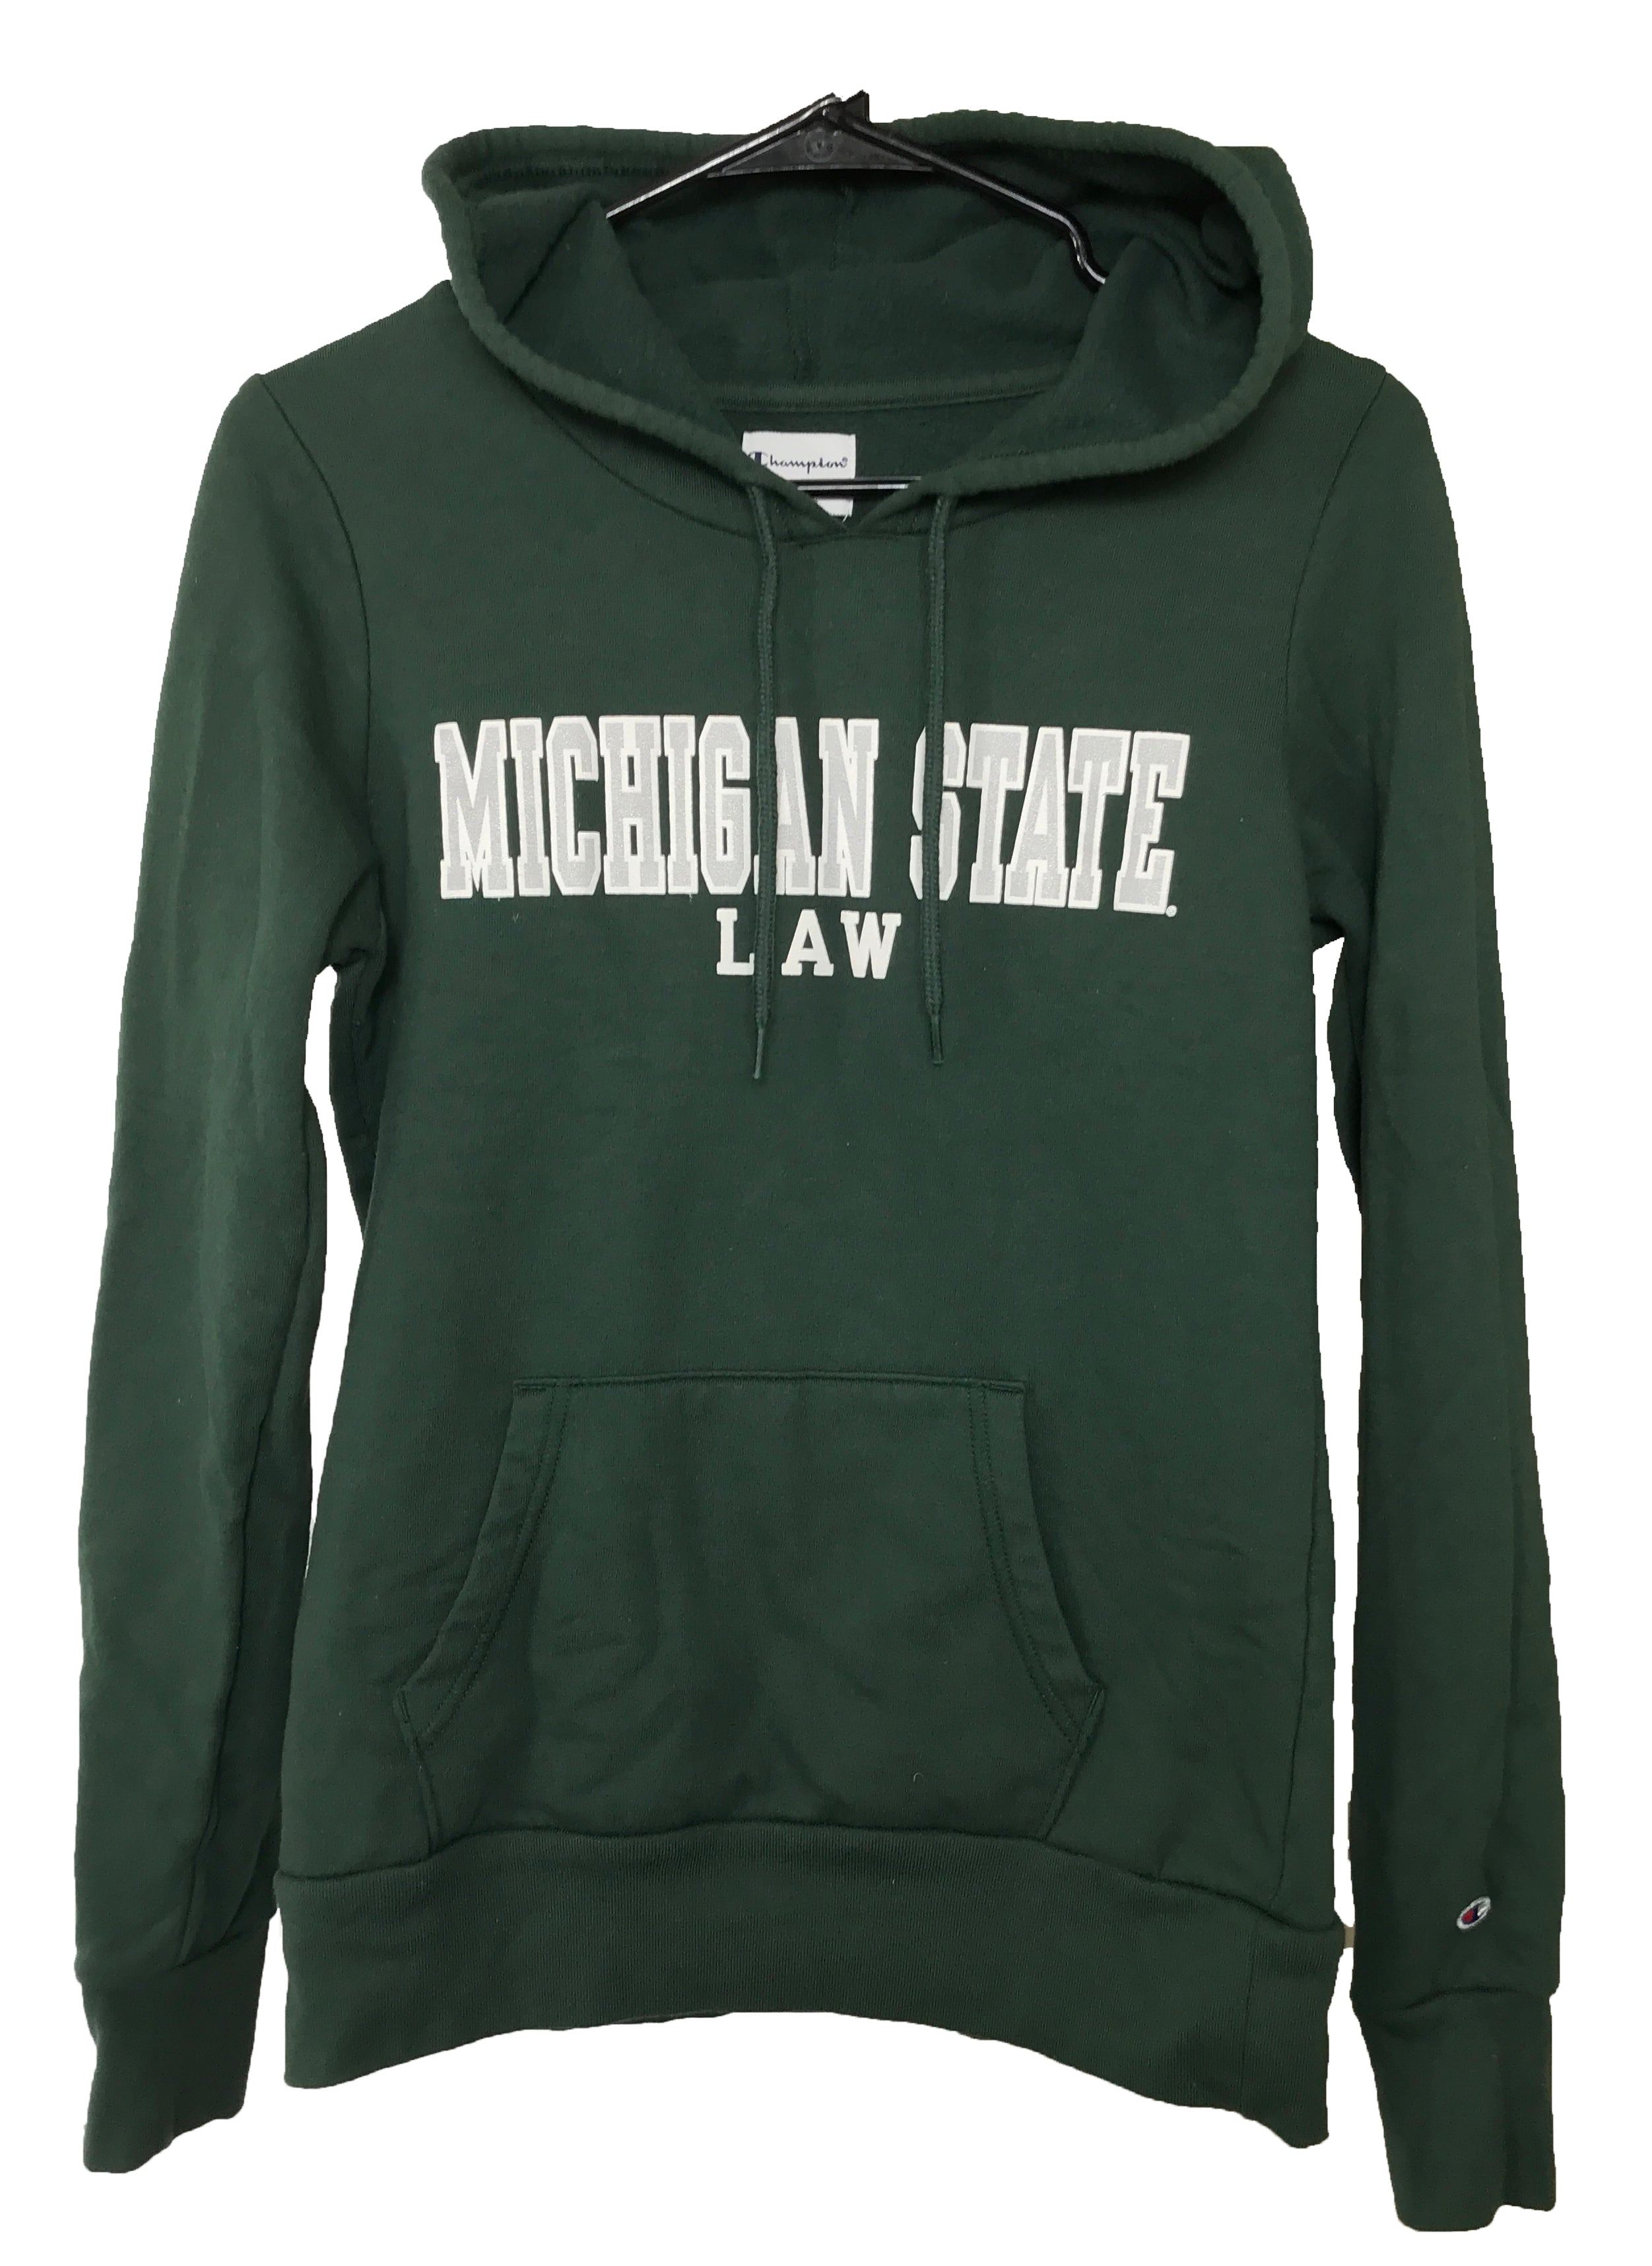 Champions Michigan State Law Green Hoodie Unisex Size S